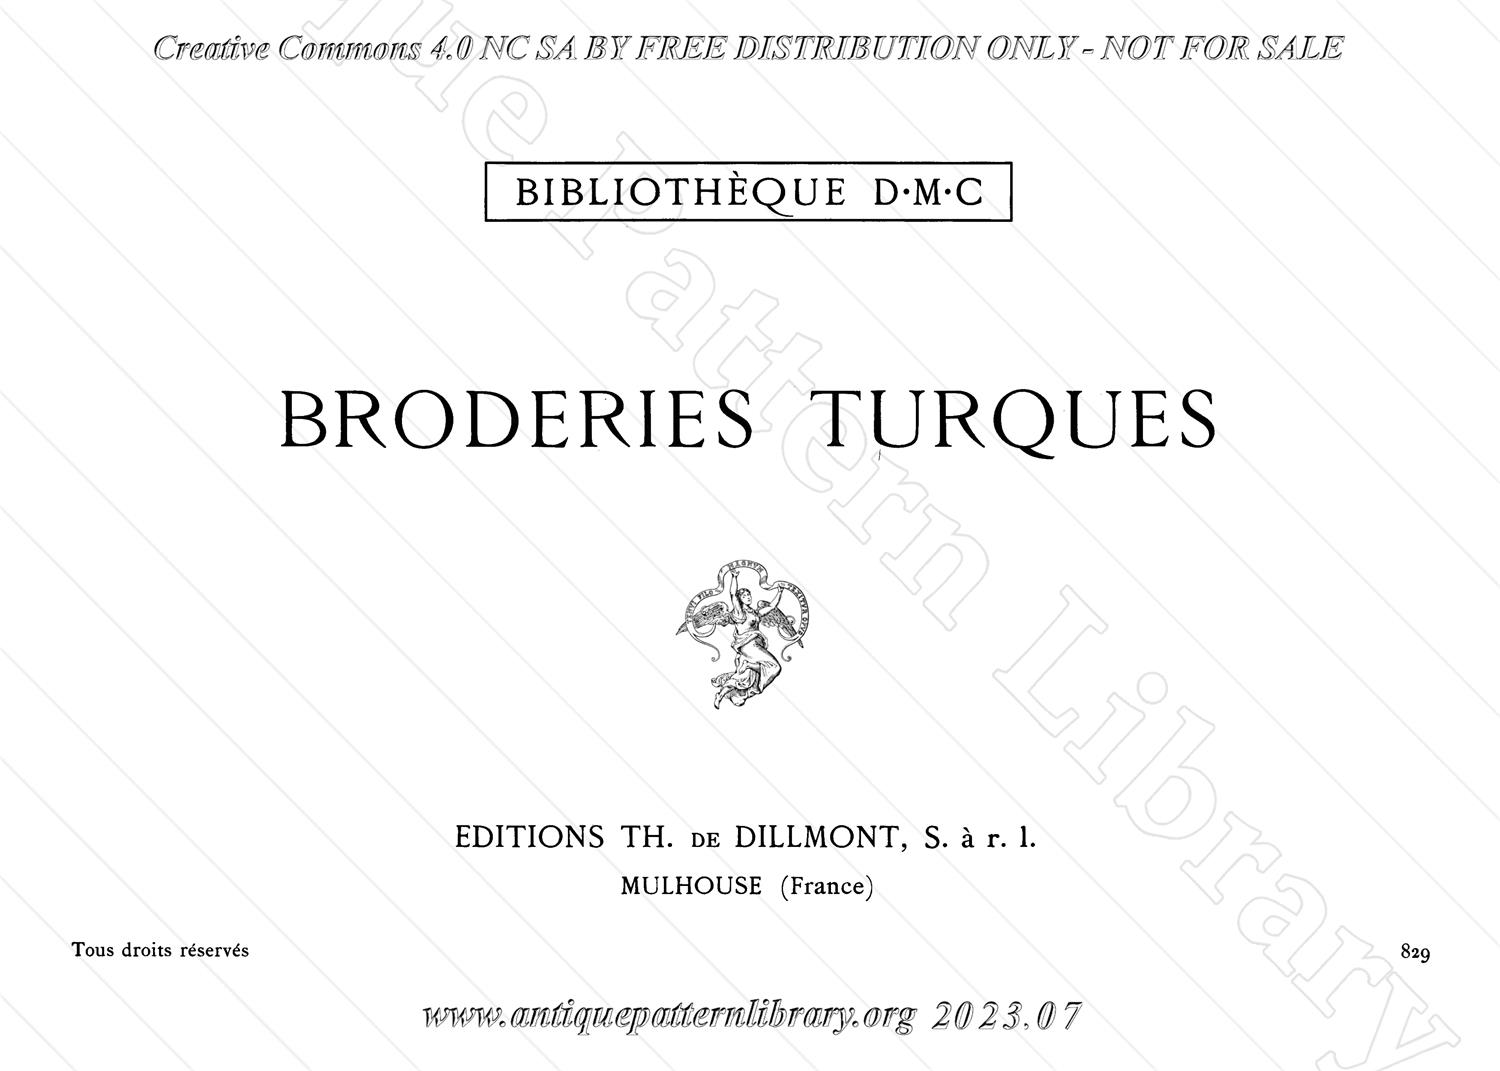 B-YS083 DMCTurques